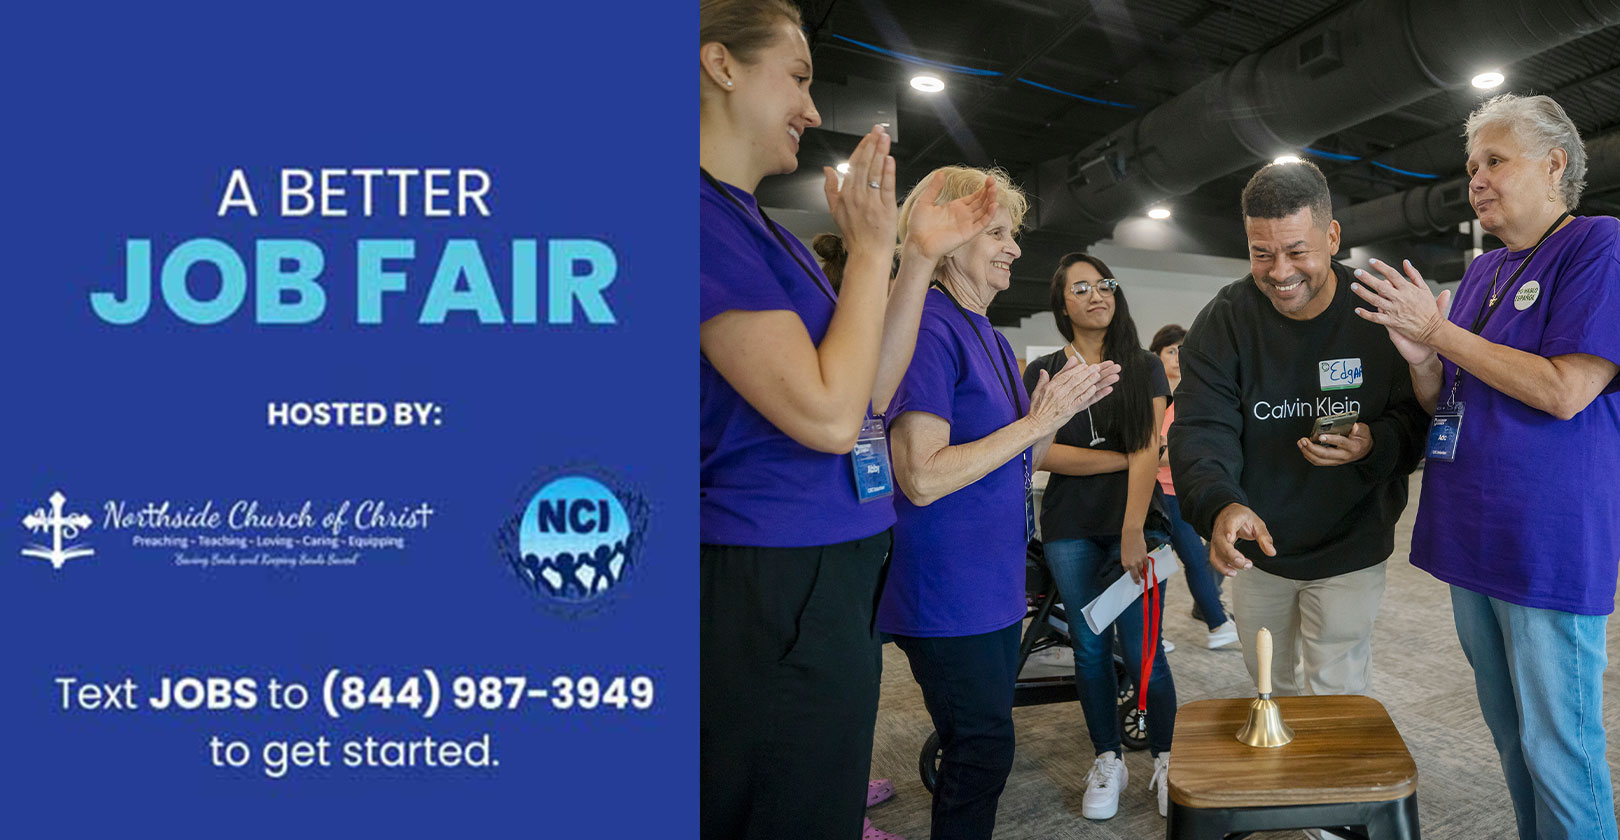 a better job fair - hosted by northside church of christ